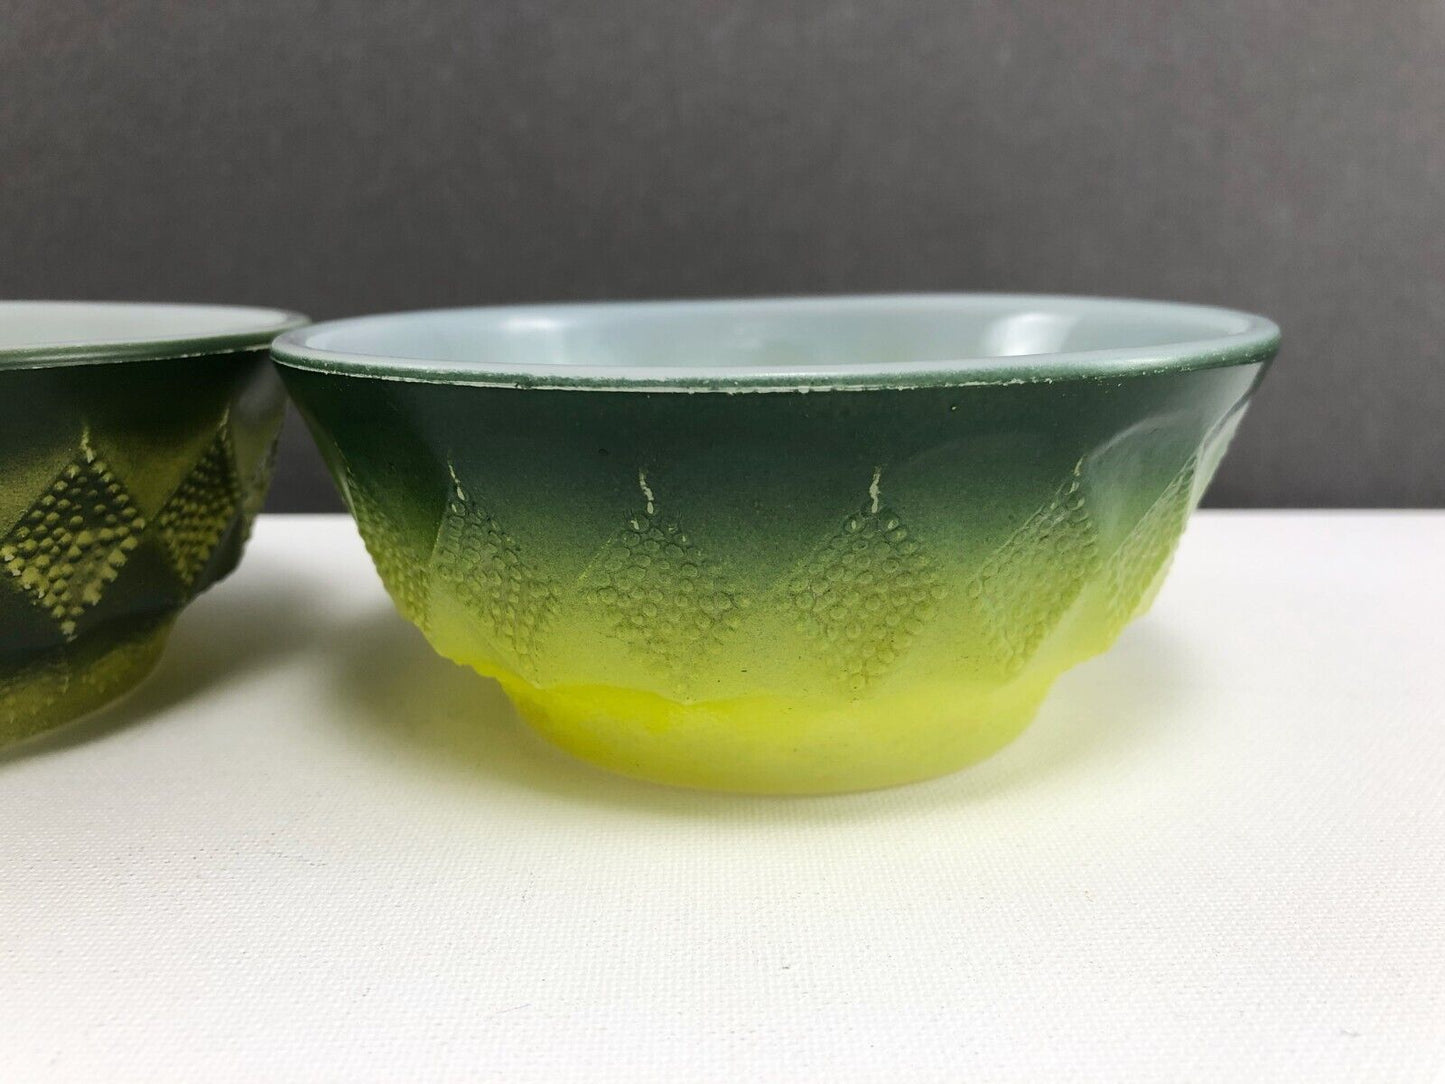 Table Top Vintage Anchor Hocking Cereal Bowl Kimberly Light Green and Dark Green